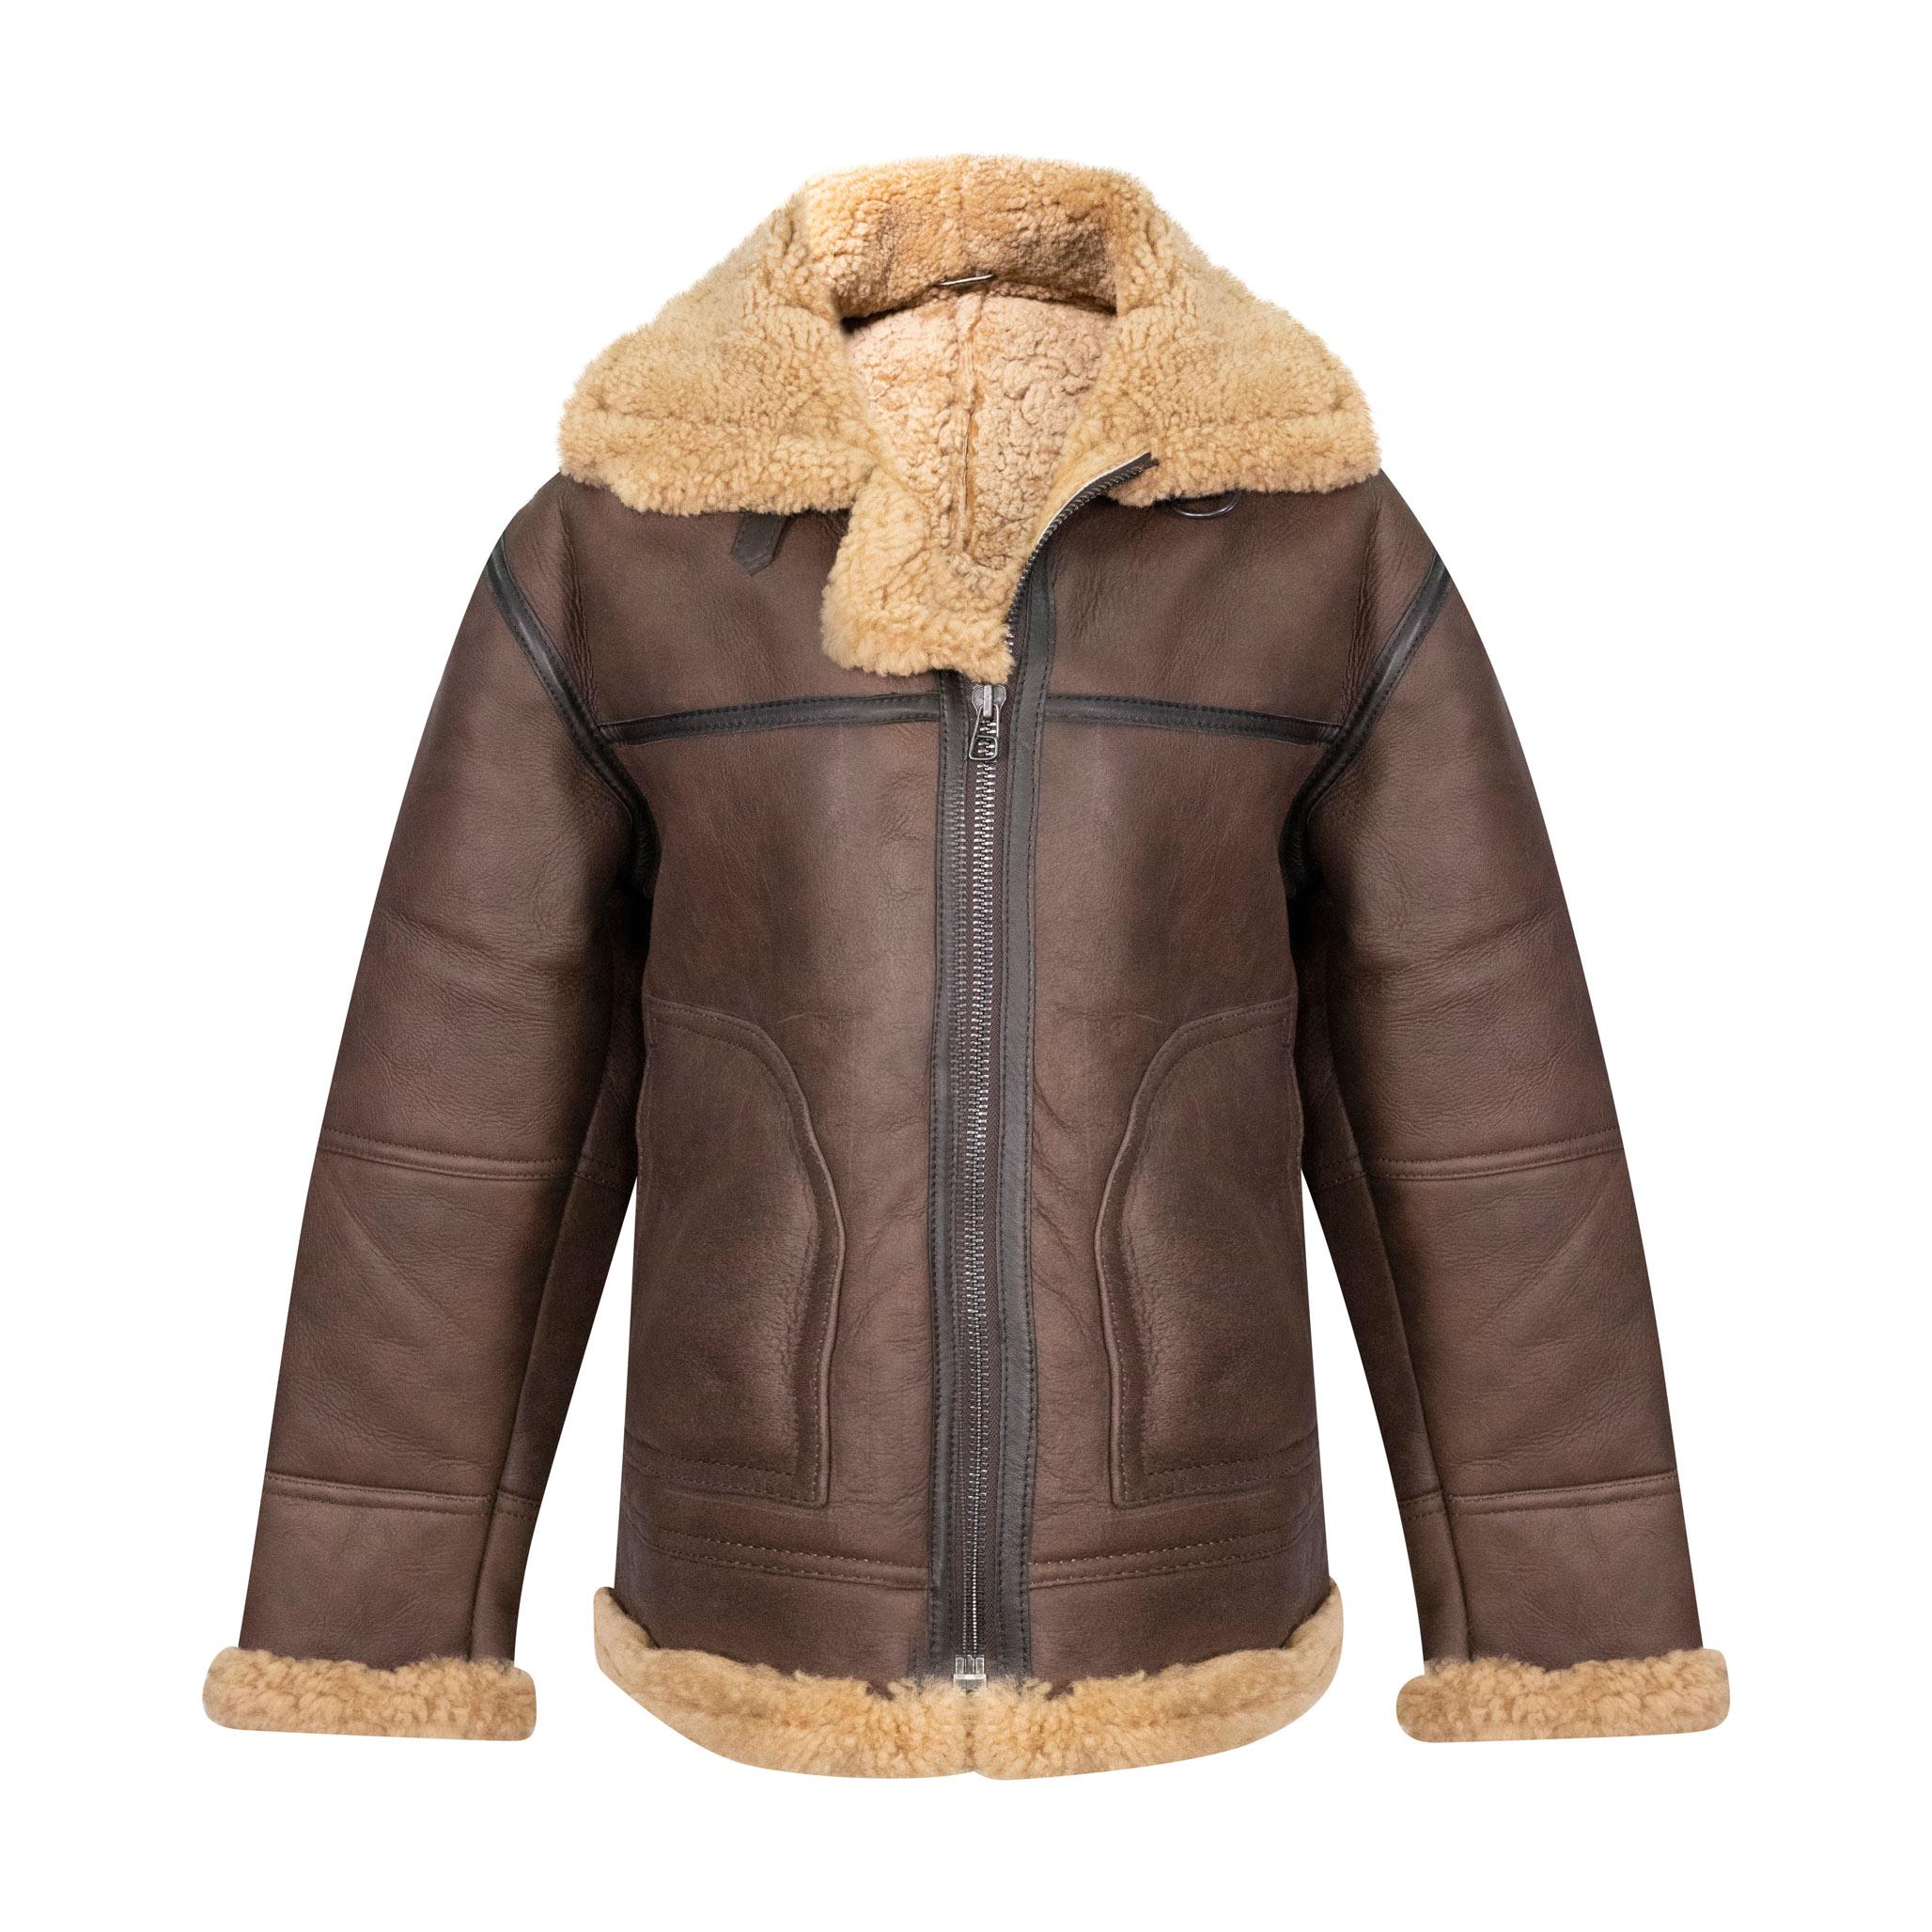 A thick sheepskin jacket in brown with ginger fur, with a vintage look.